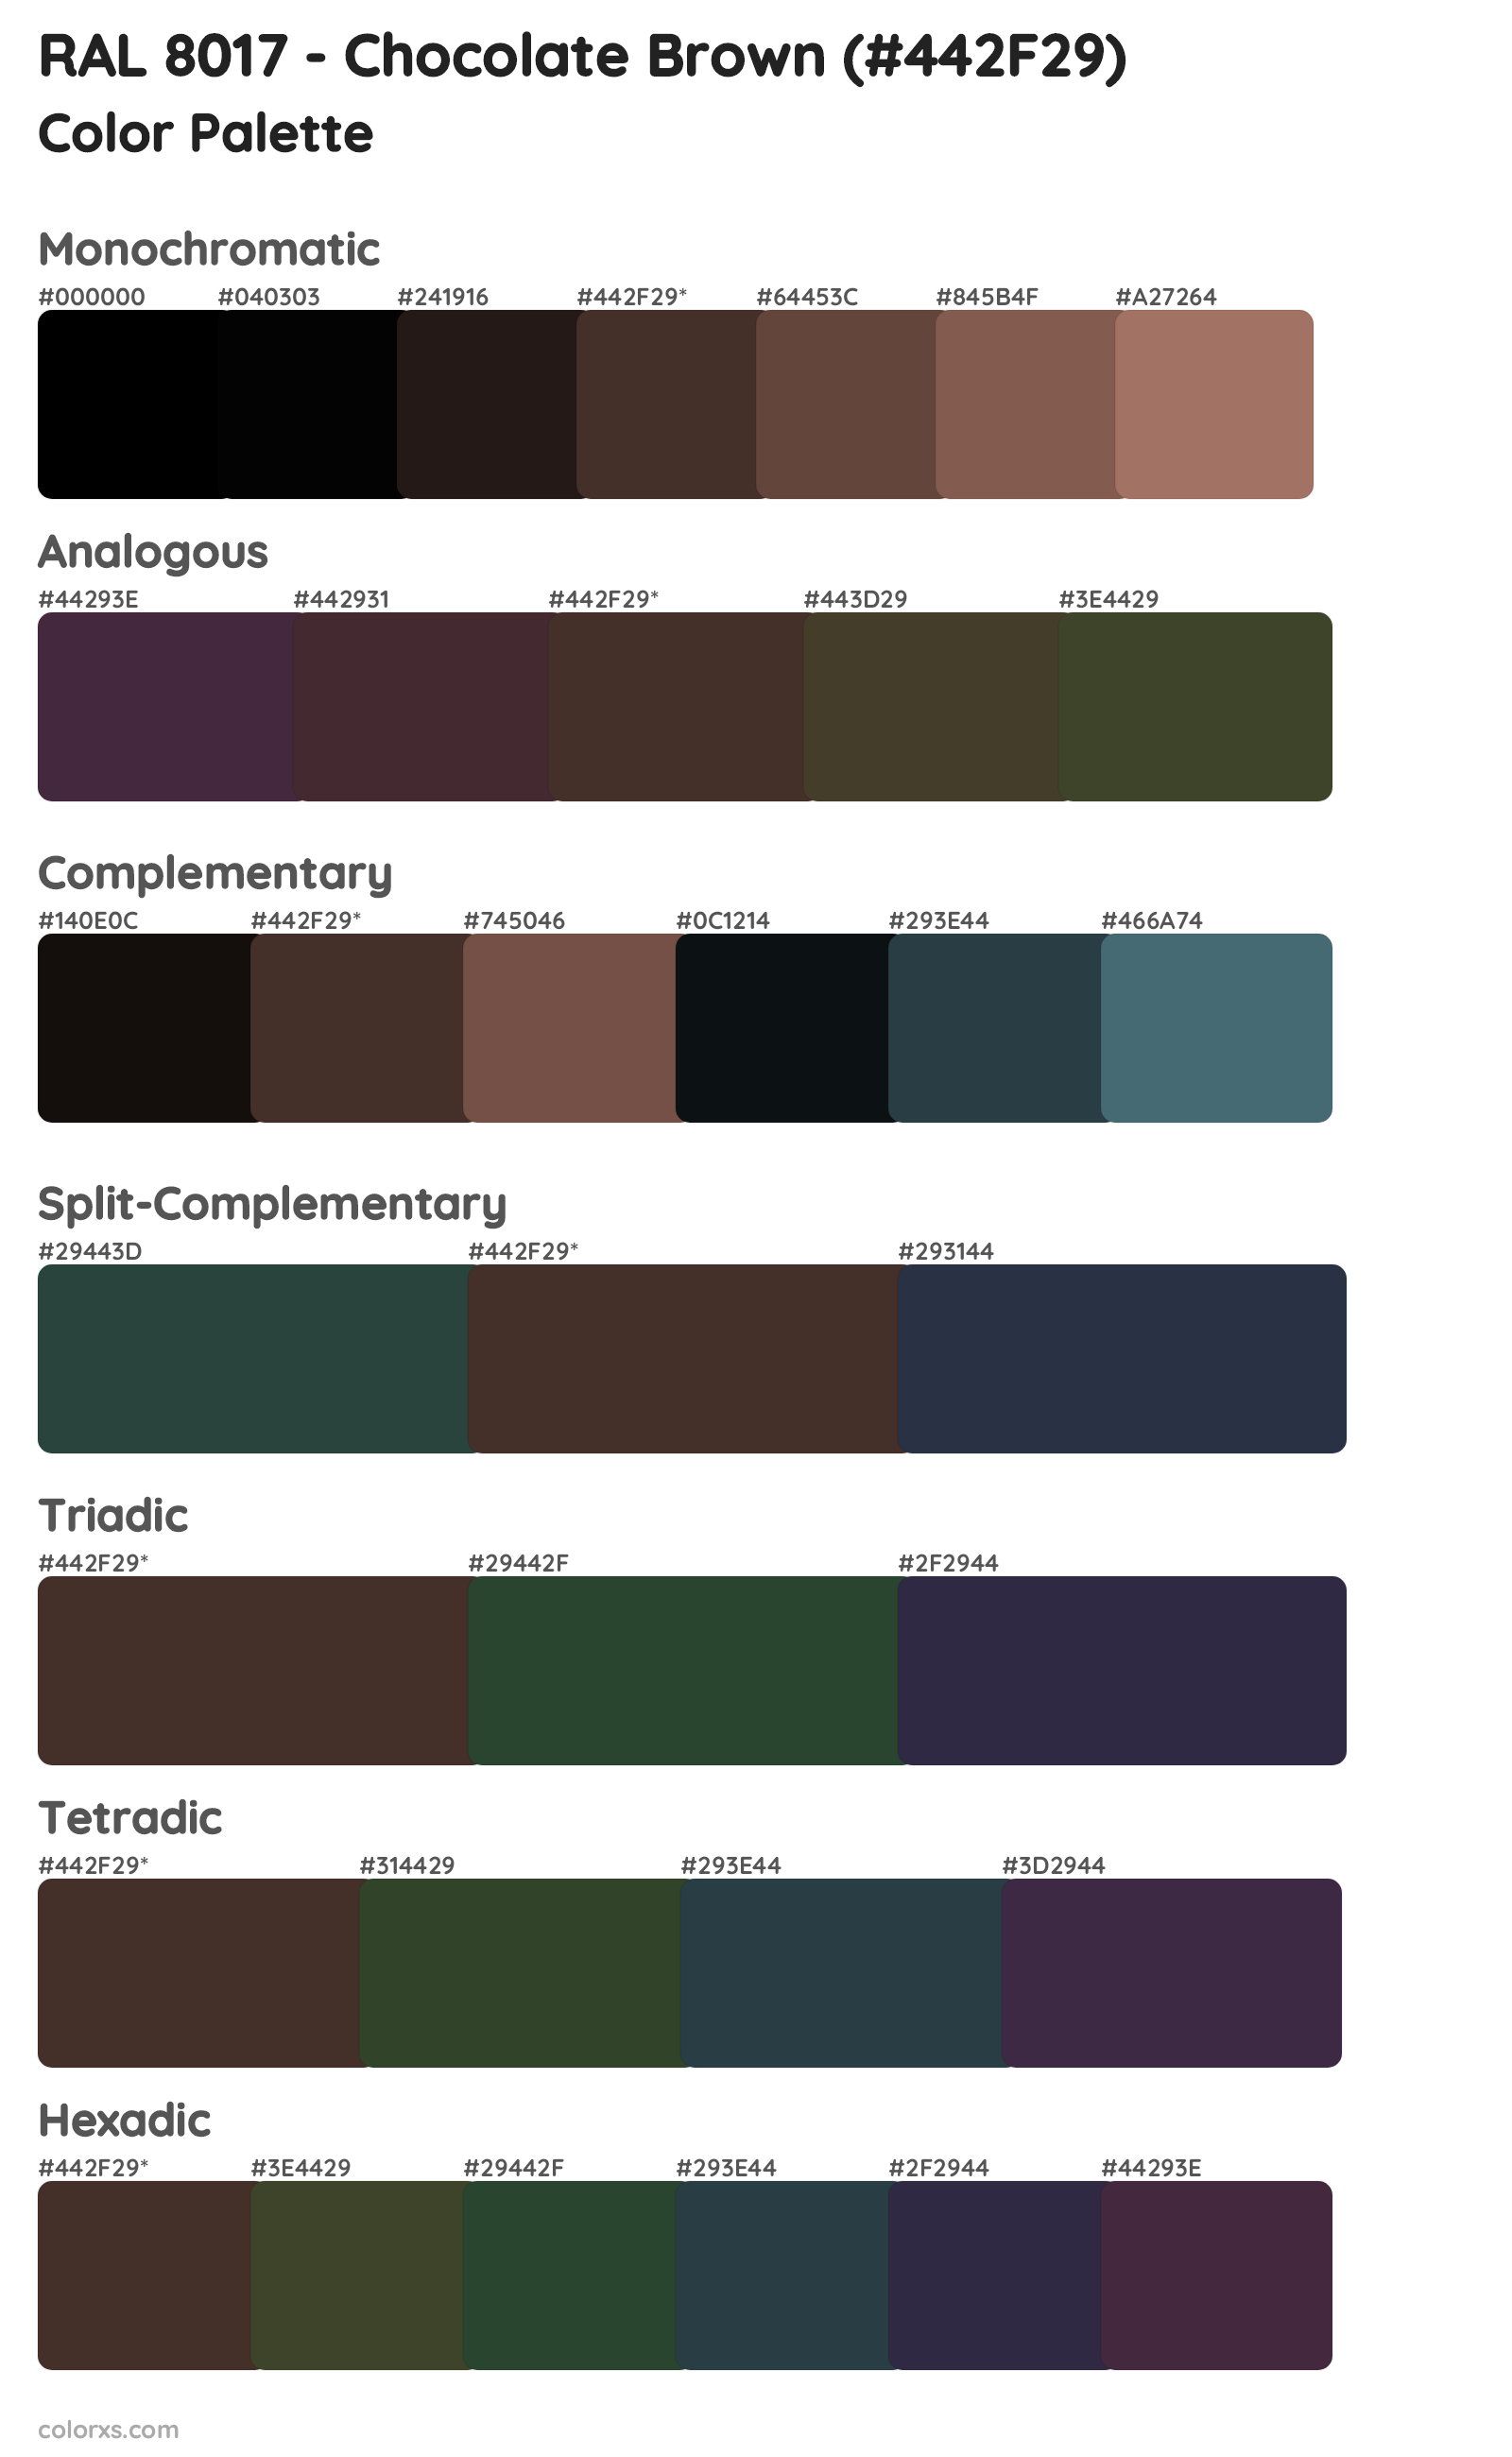 RAL 8017 - Chocolate Brown Color Scheme Palettes